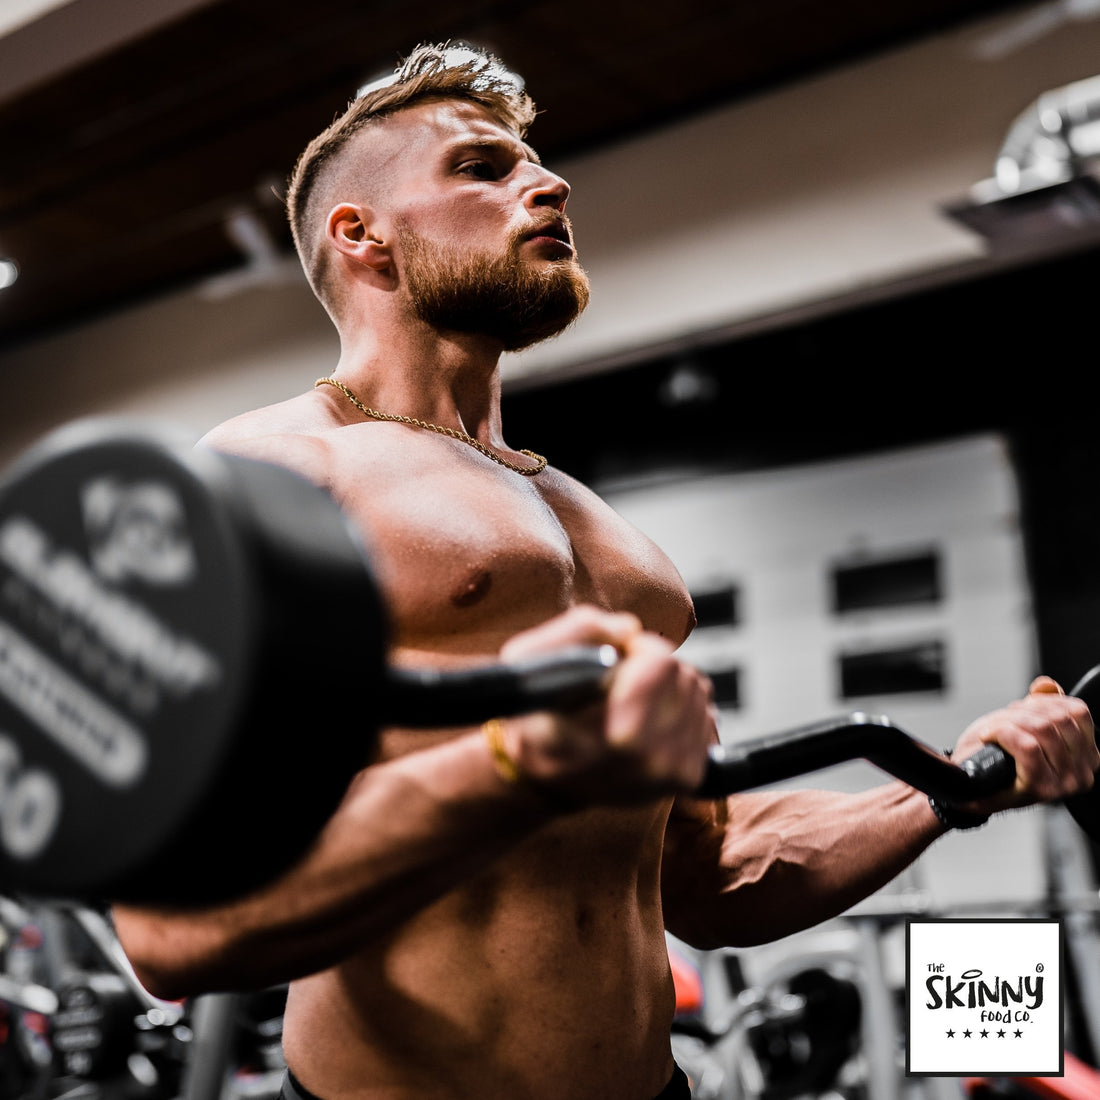 How To Gain Muscle Mass - theskinnyfoodco